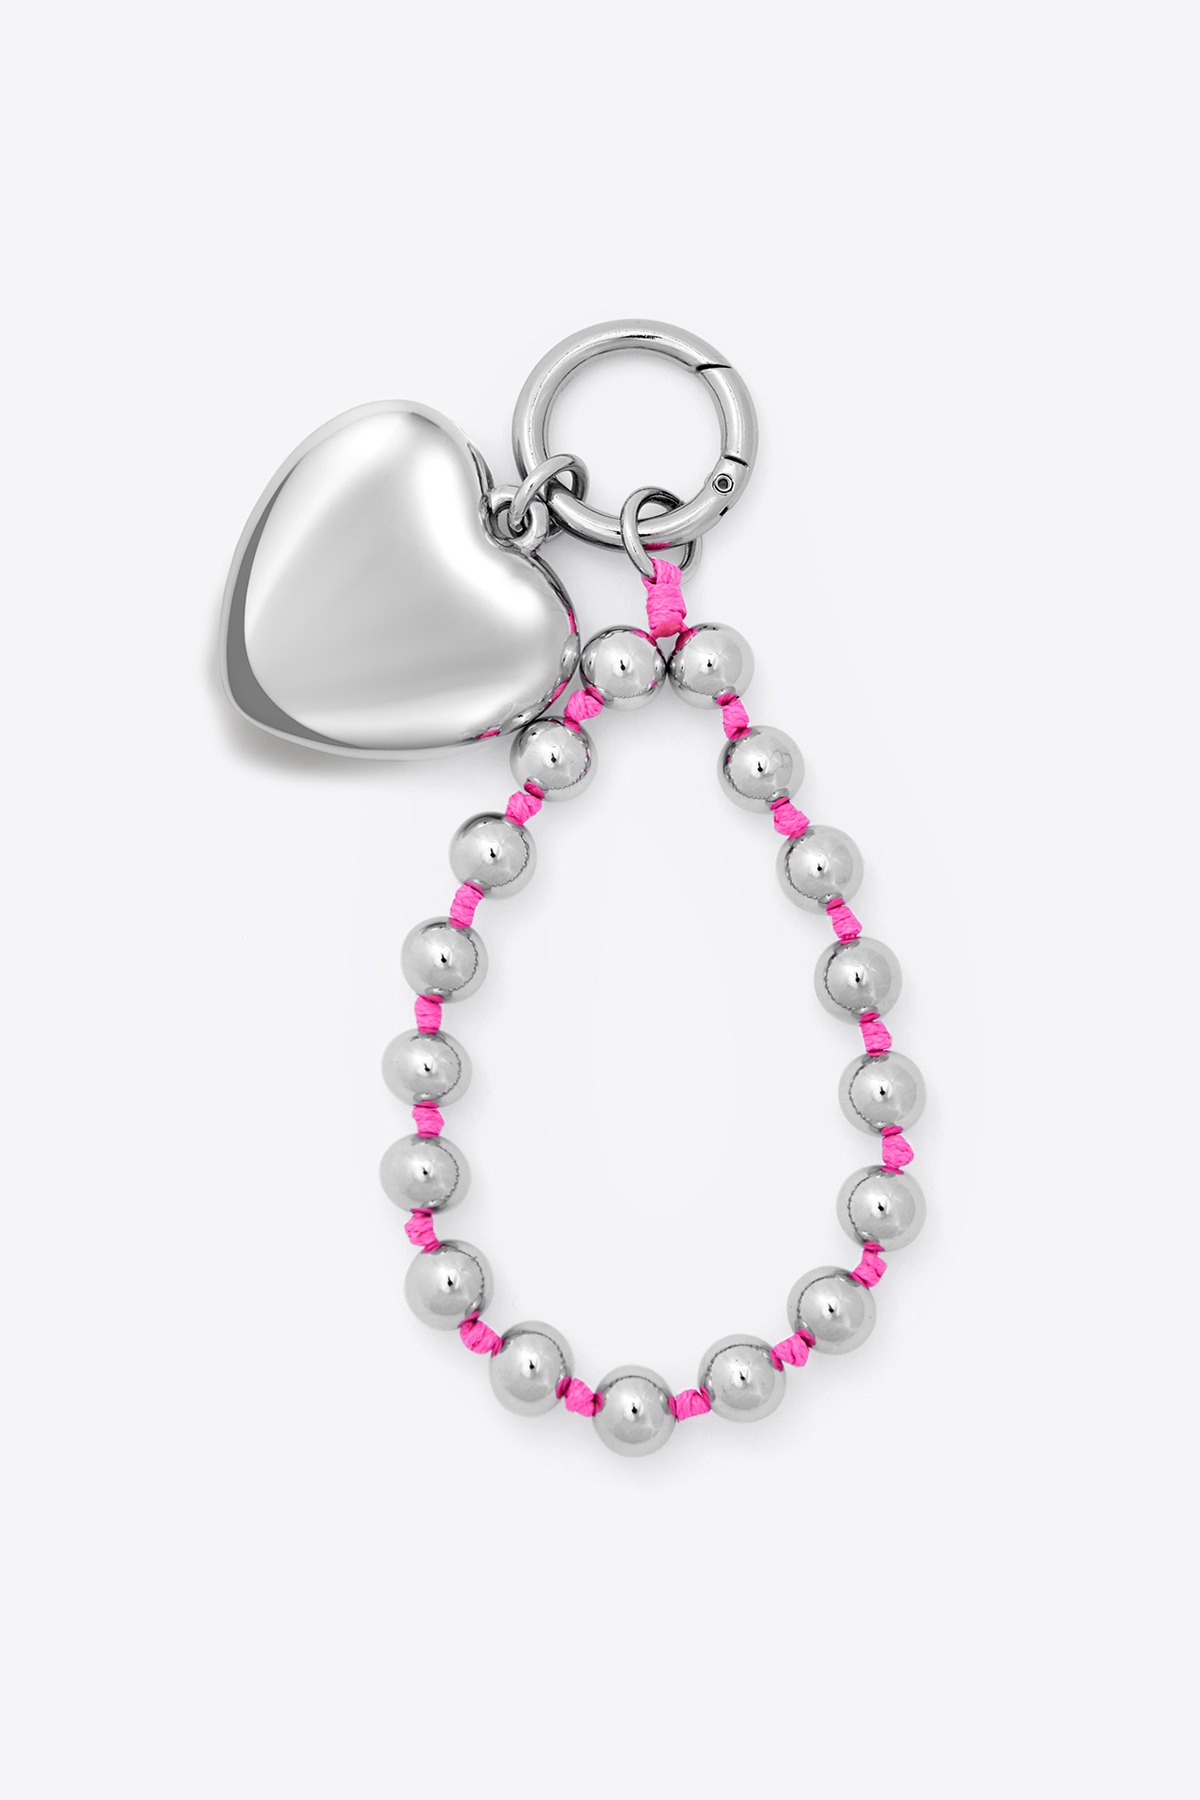 Heart And Ball Strap Keyring-neon pink